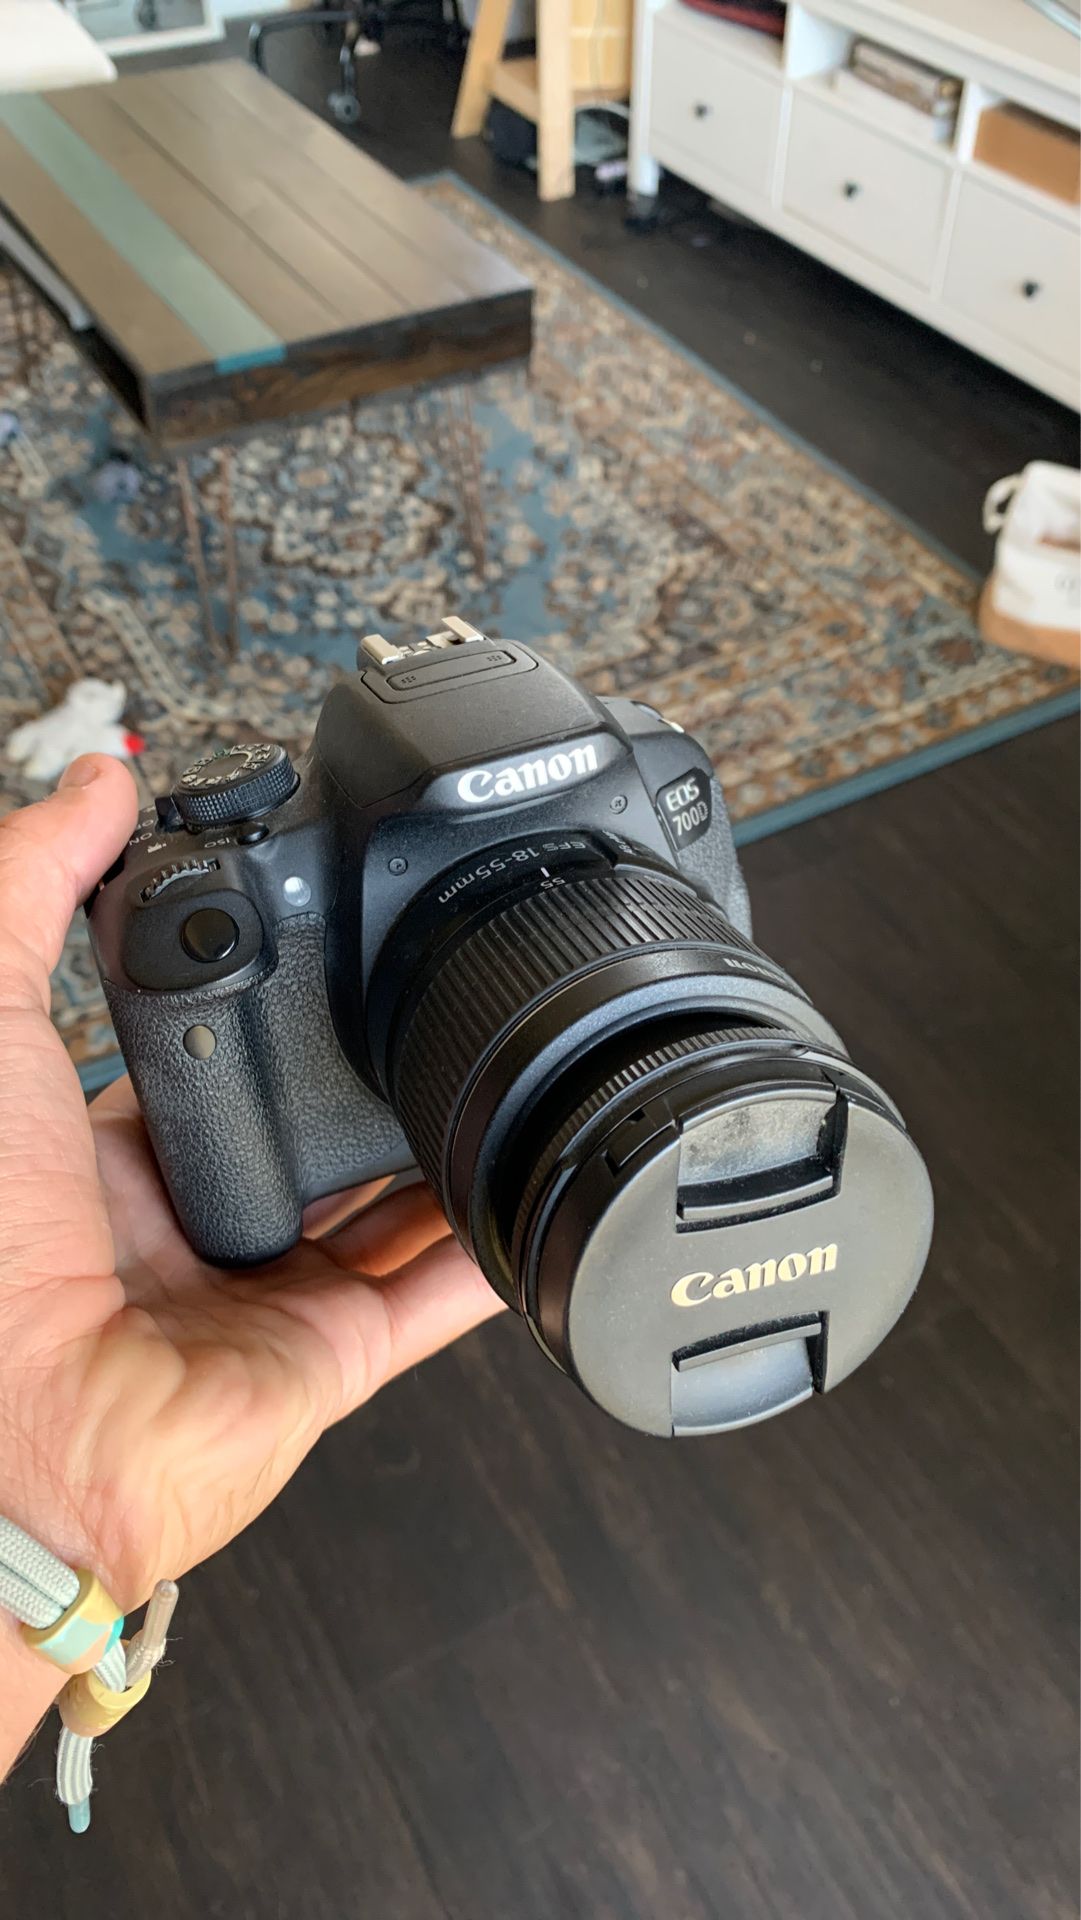 Canon 700d (t5i) with 3 lenses